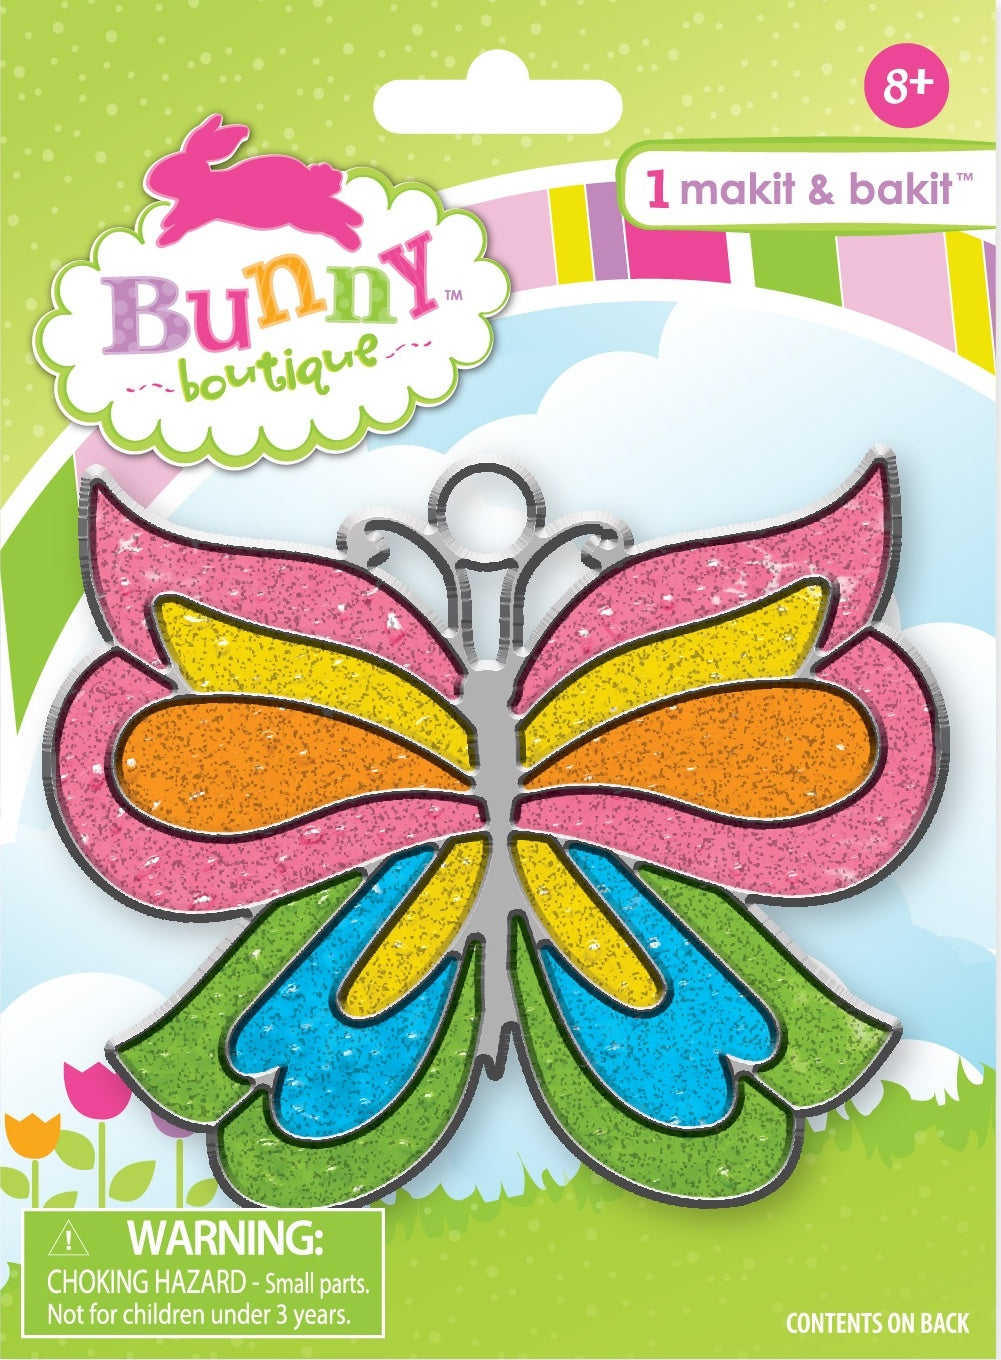 Makit and Bakit Kit. Design features a colorful butterfly.